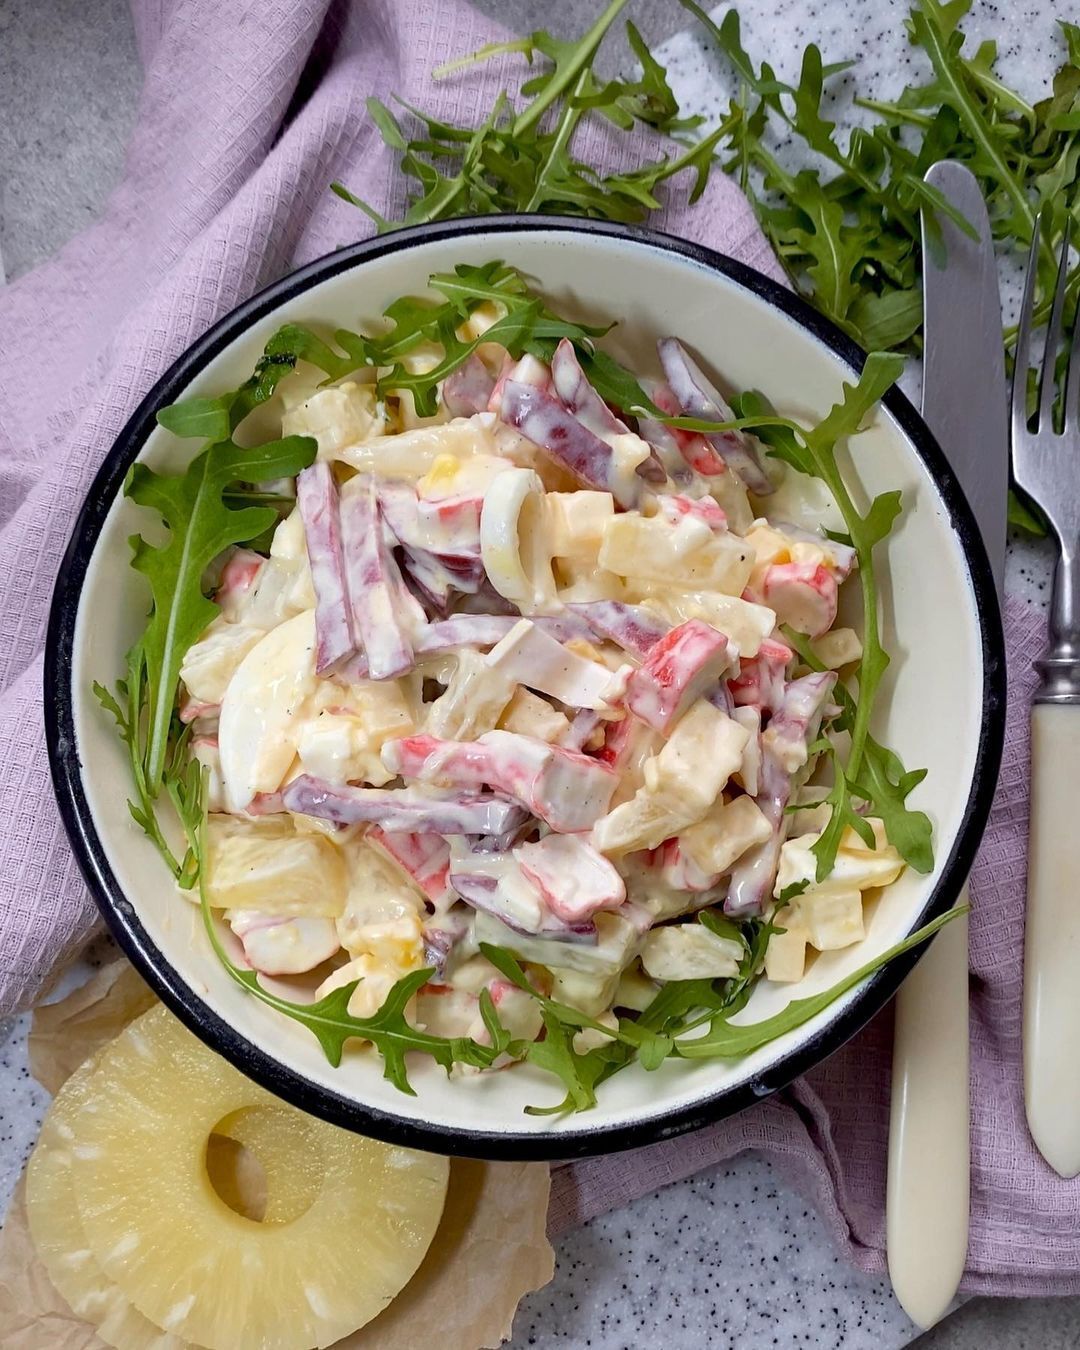 Summer crab salad with an unexpected ingredient: the dish takes 10 minutes to prepare